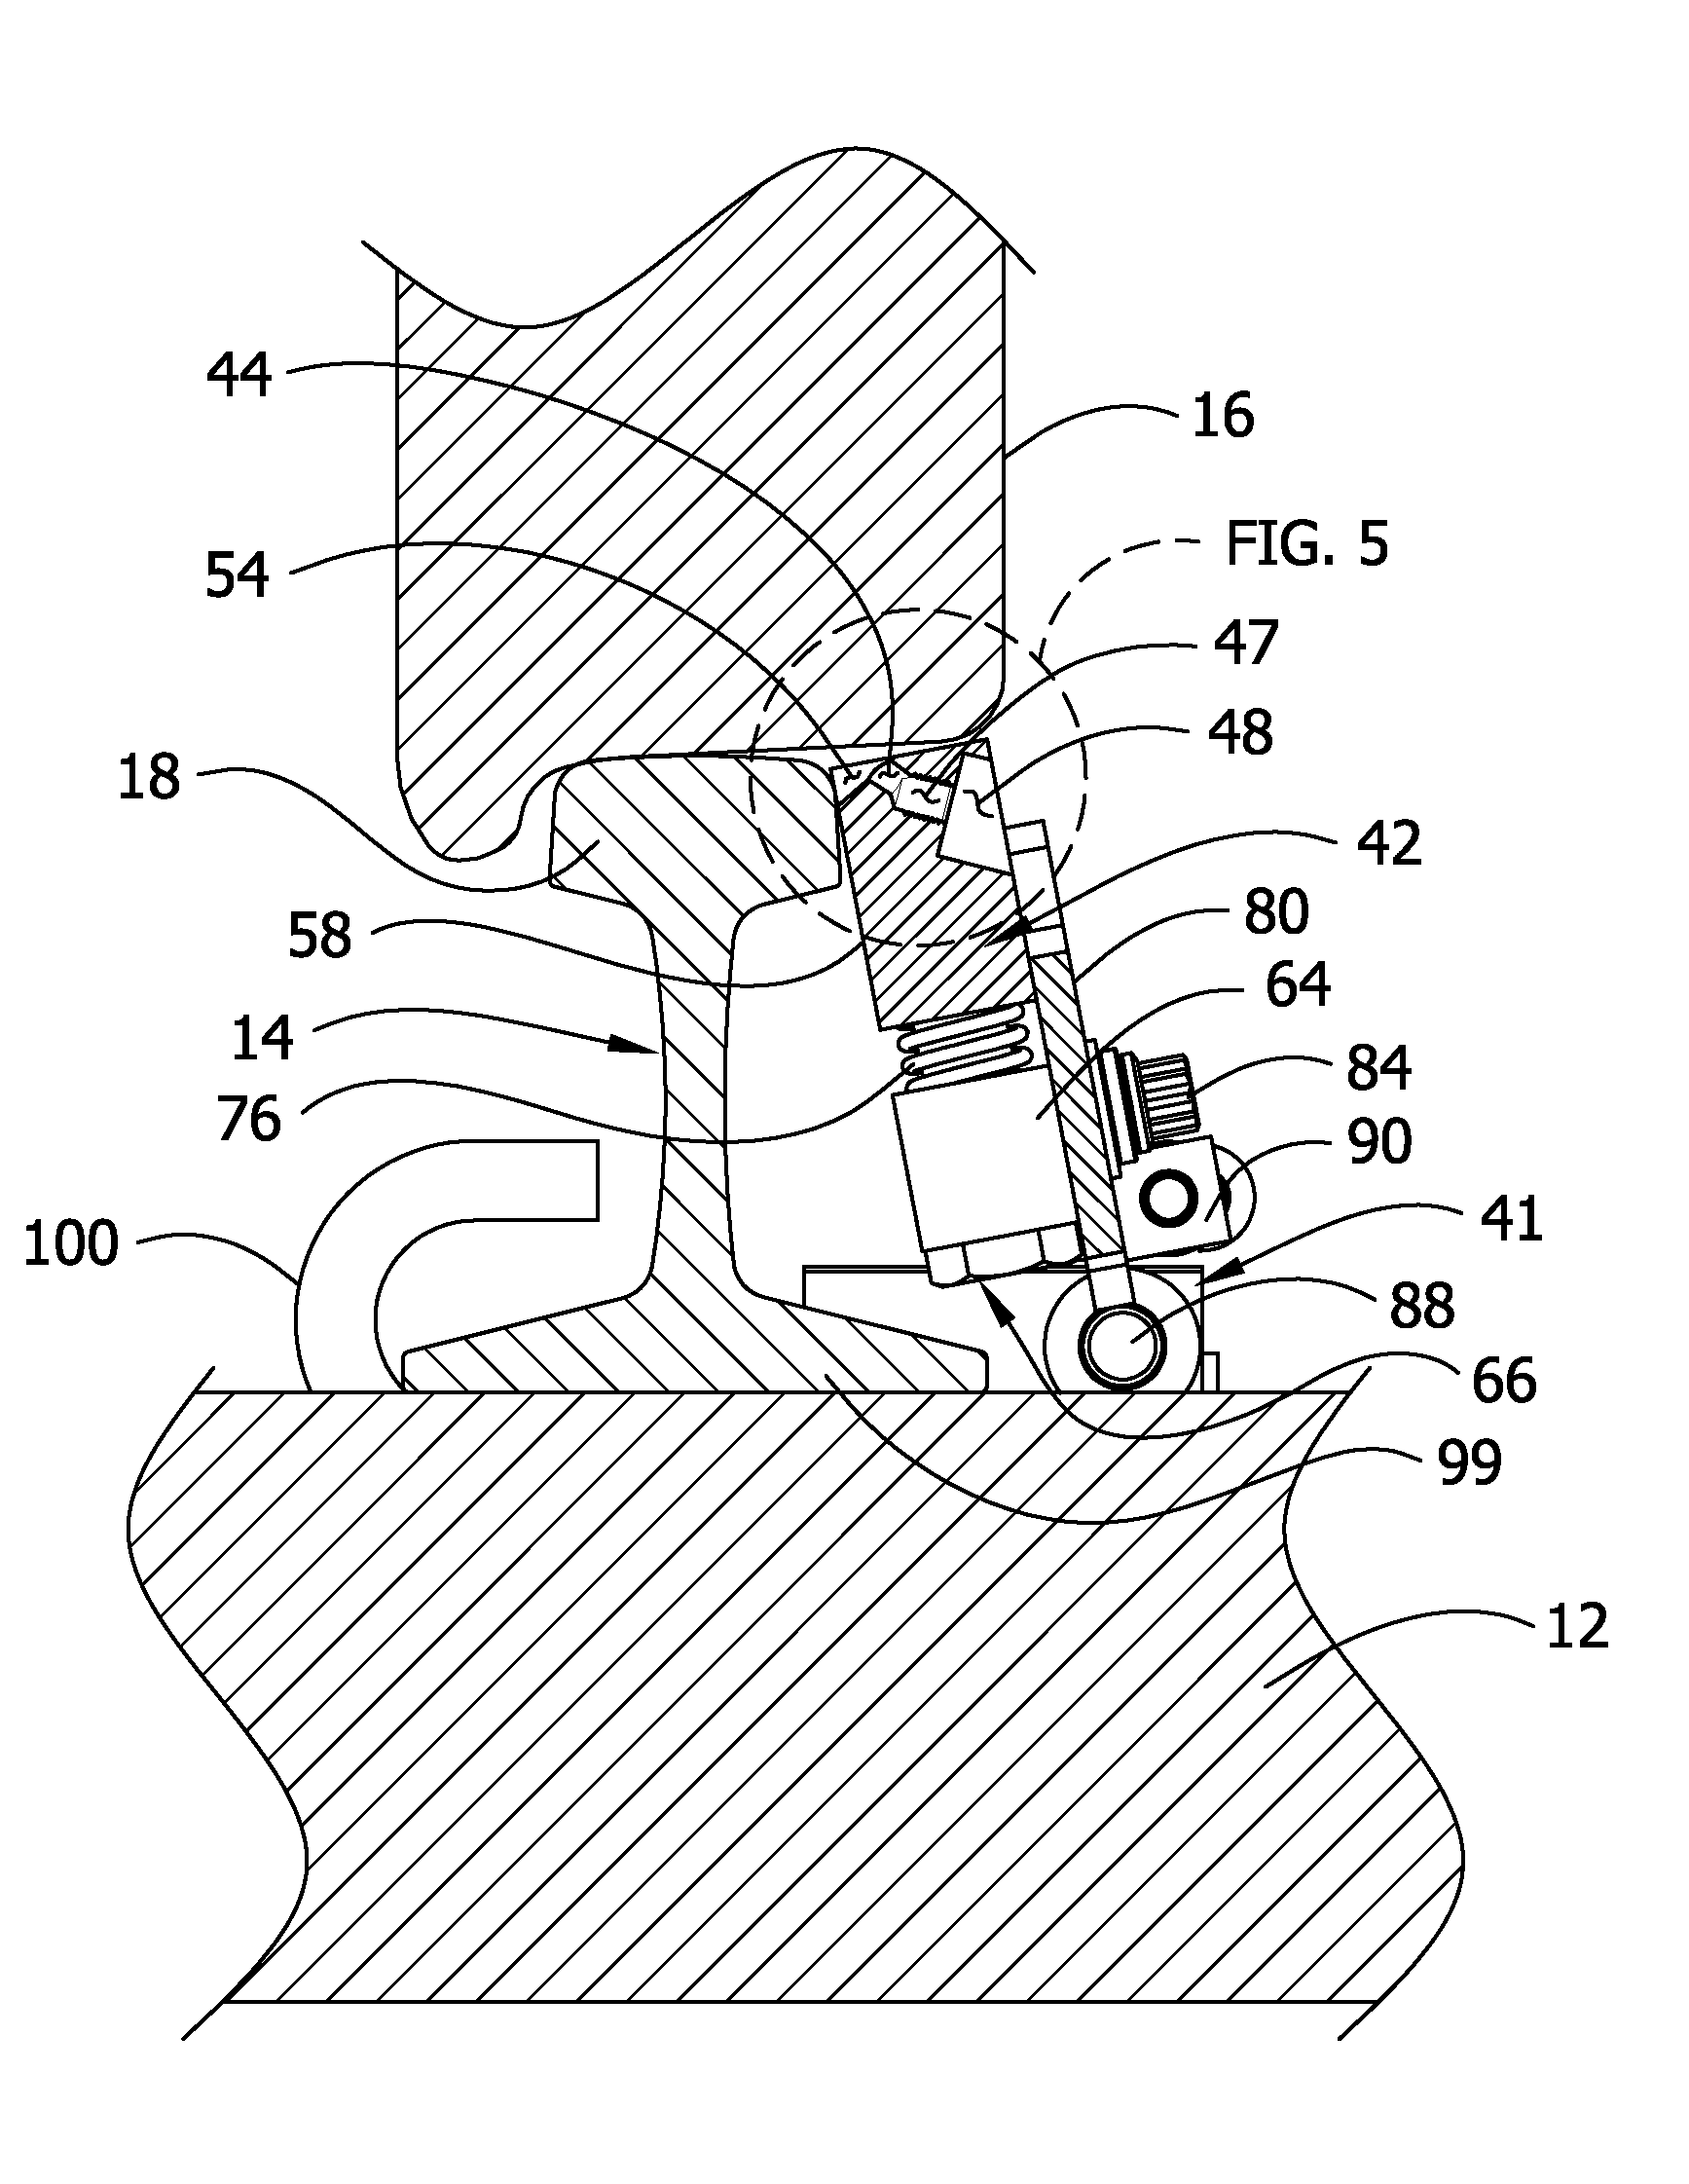 Apparatus for Applying a Pumpable Material to a Rail Head